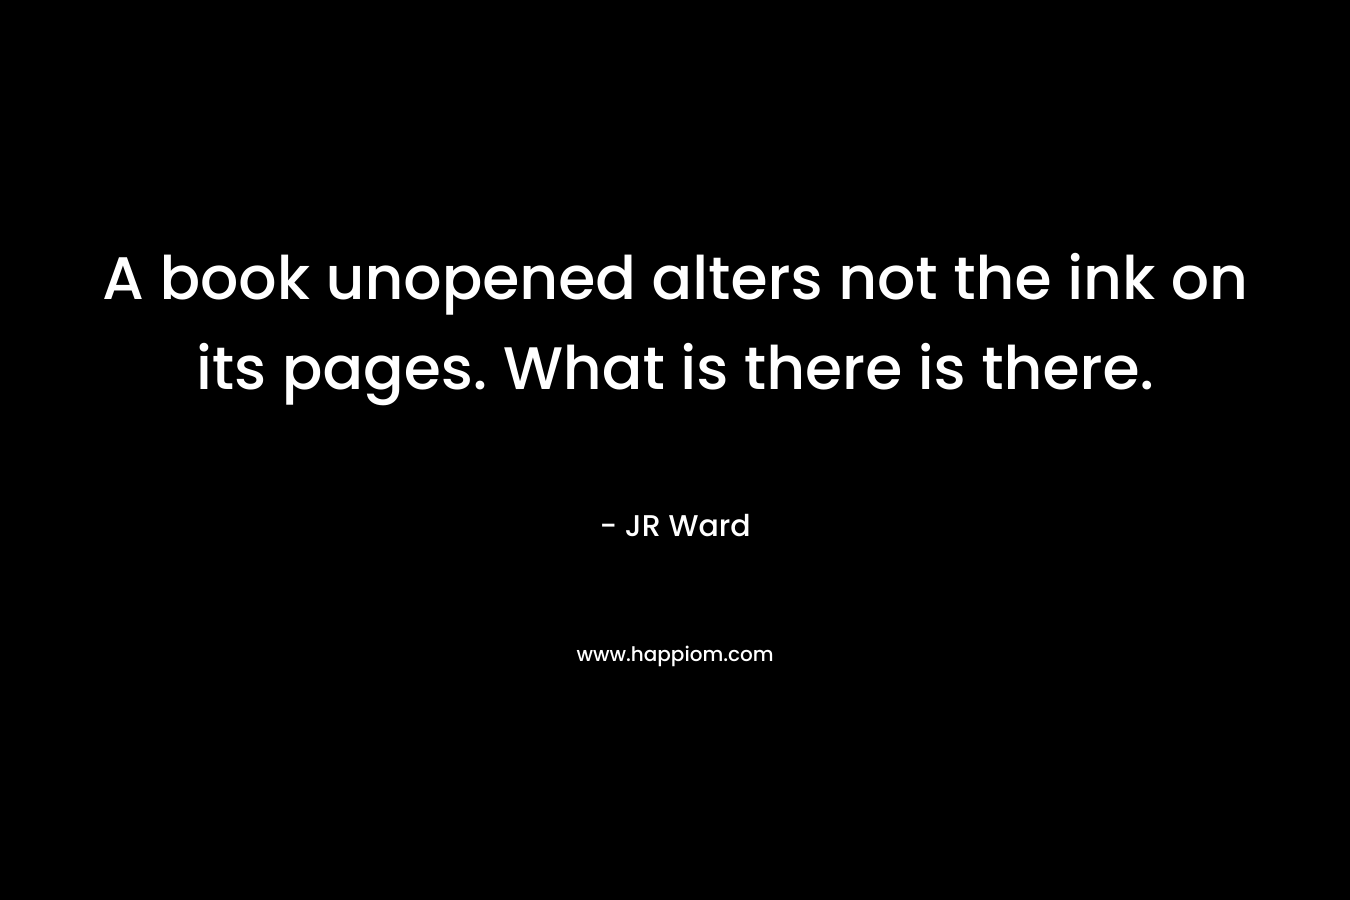 A book unopened alters not the ink on its pages. What is there is there. – JR Ward